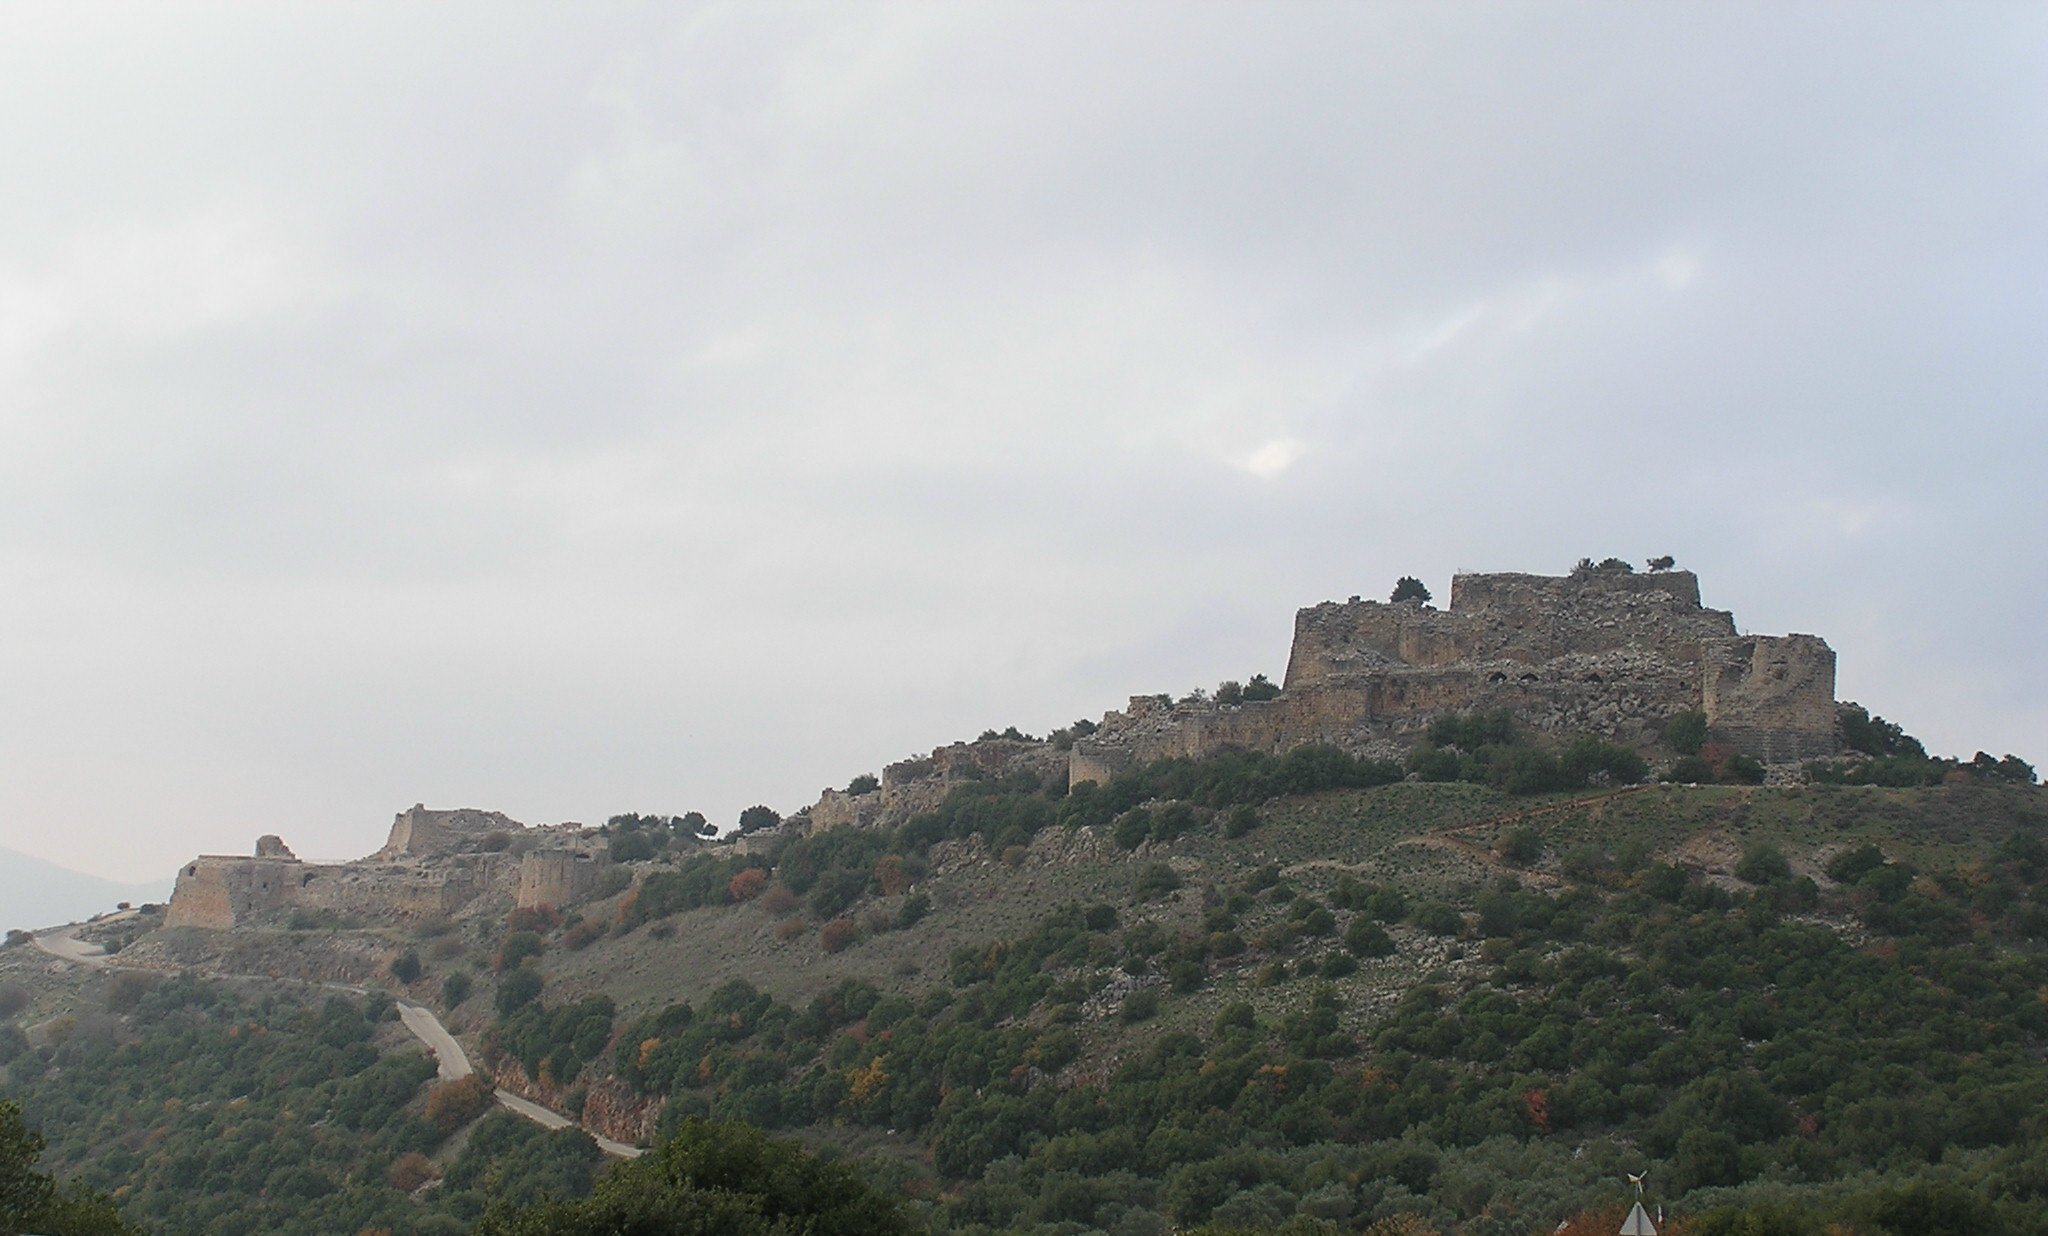 Nimrods Fortress - Crusader castle from 13th Century